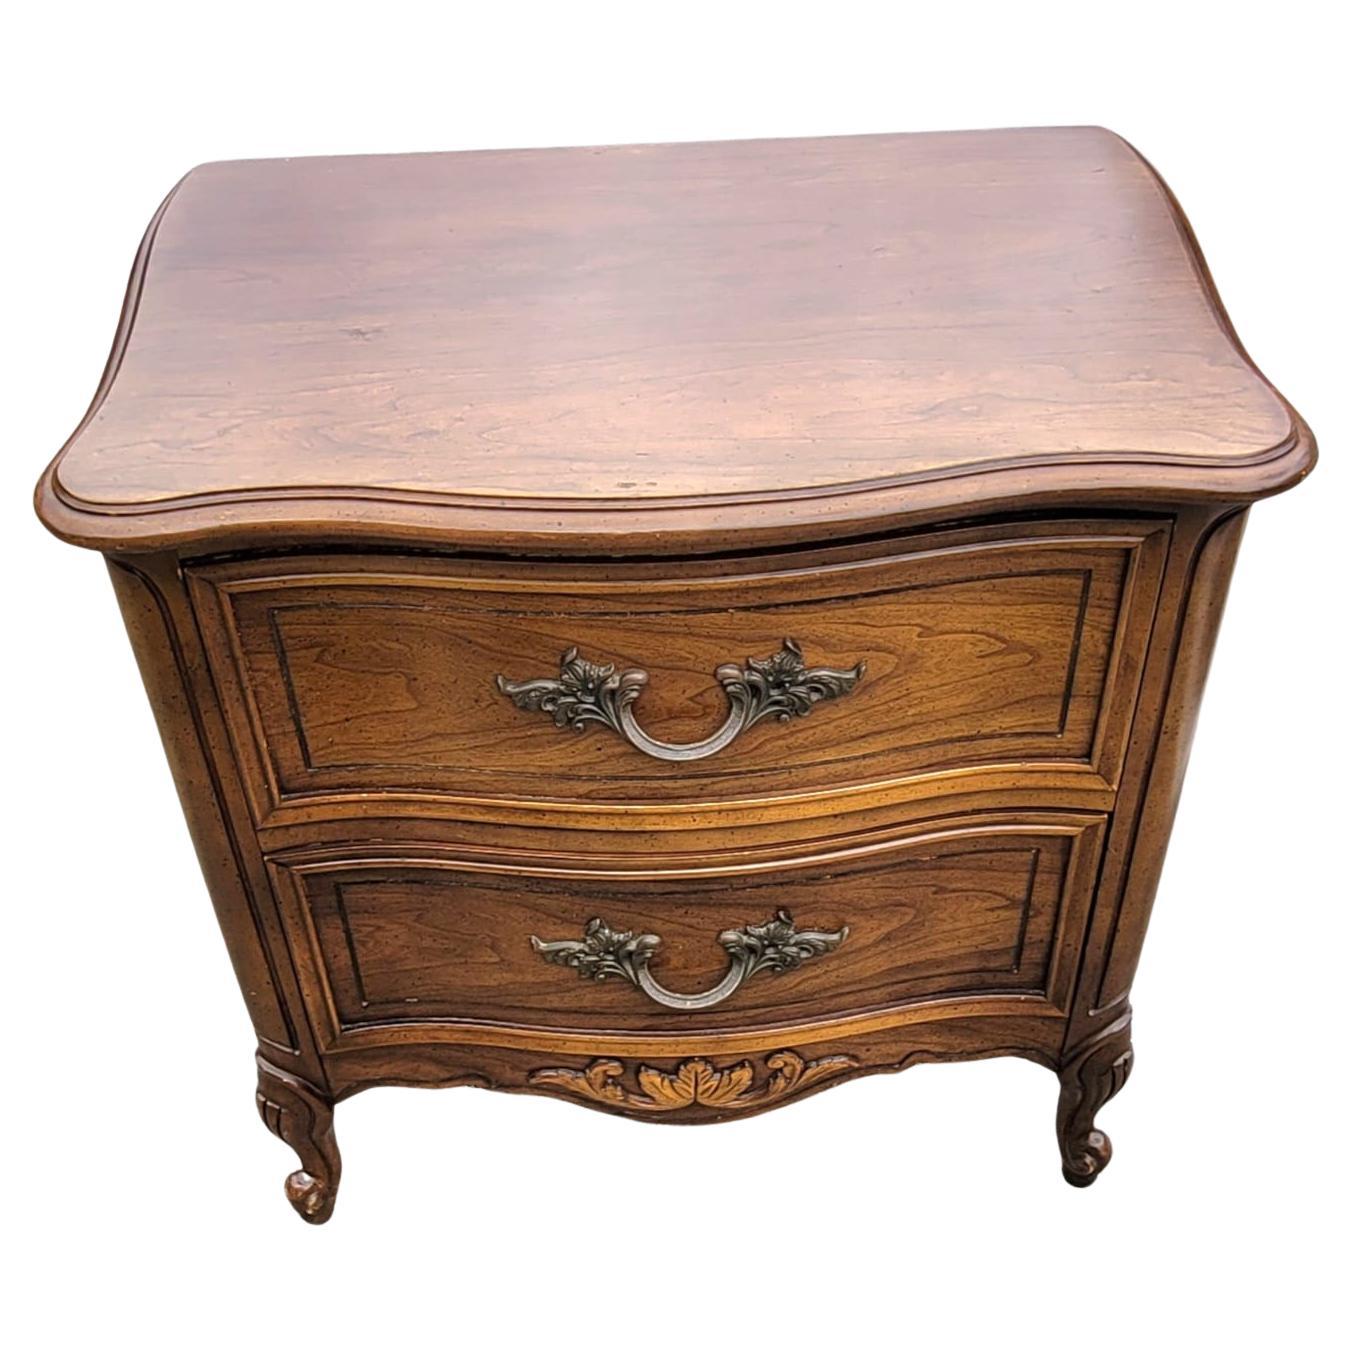 A Dixie Provincial Style bedside chest of drawers or nightstand in very good vintage condition. Very solid construction with dovetailed drawers. Measures 26